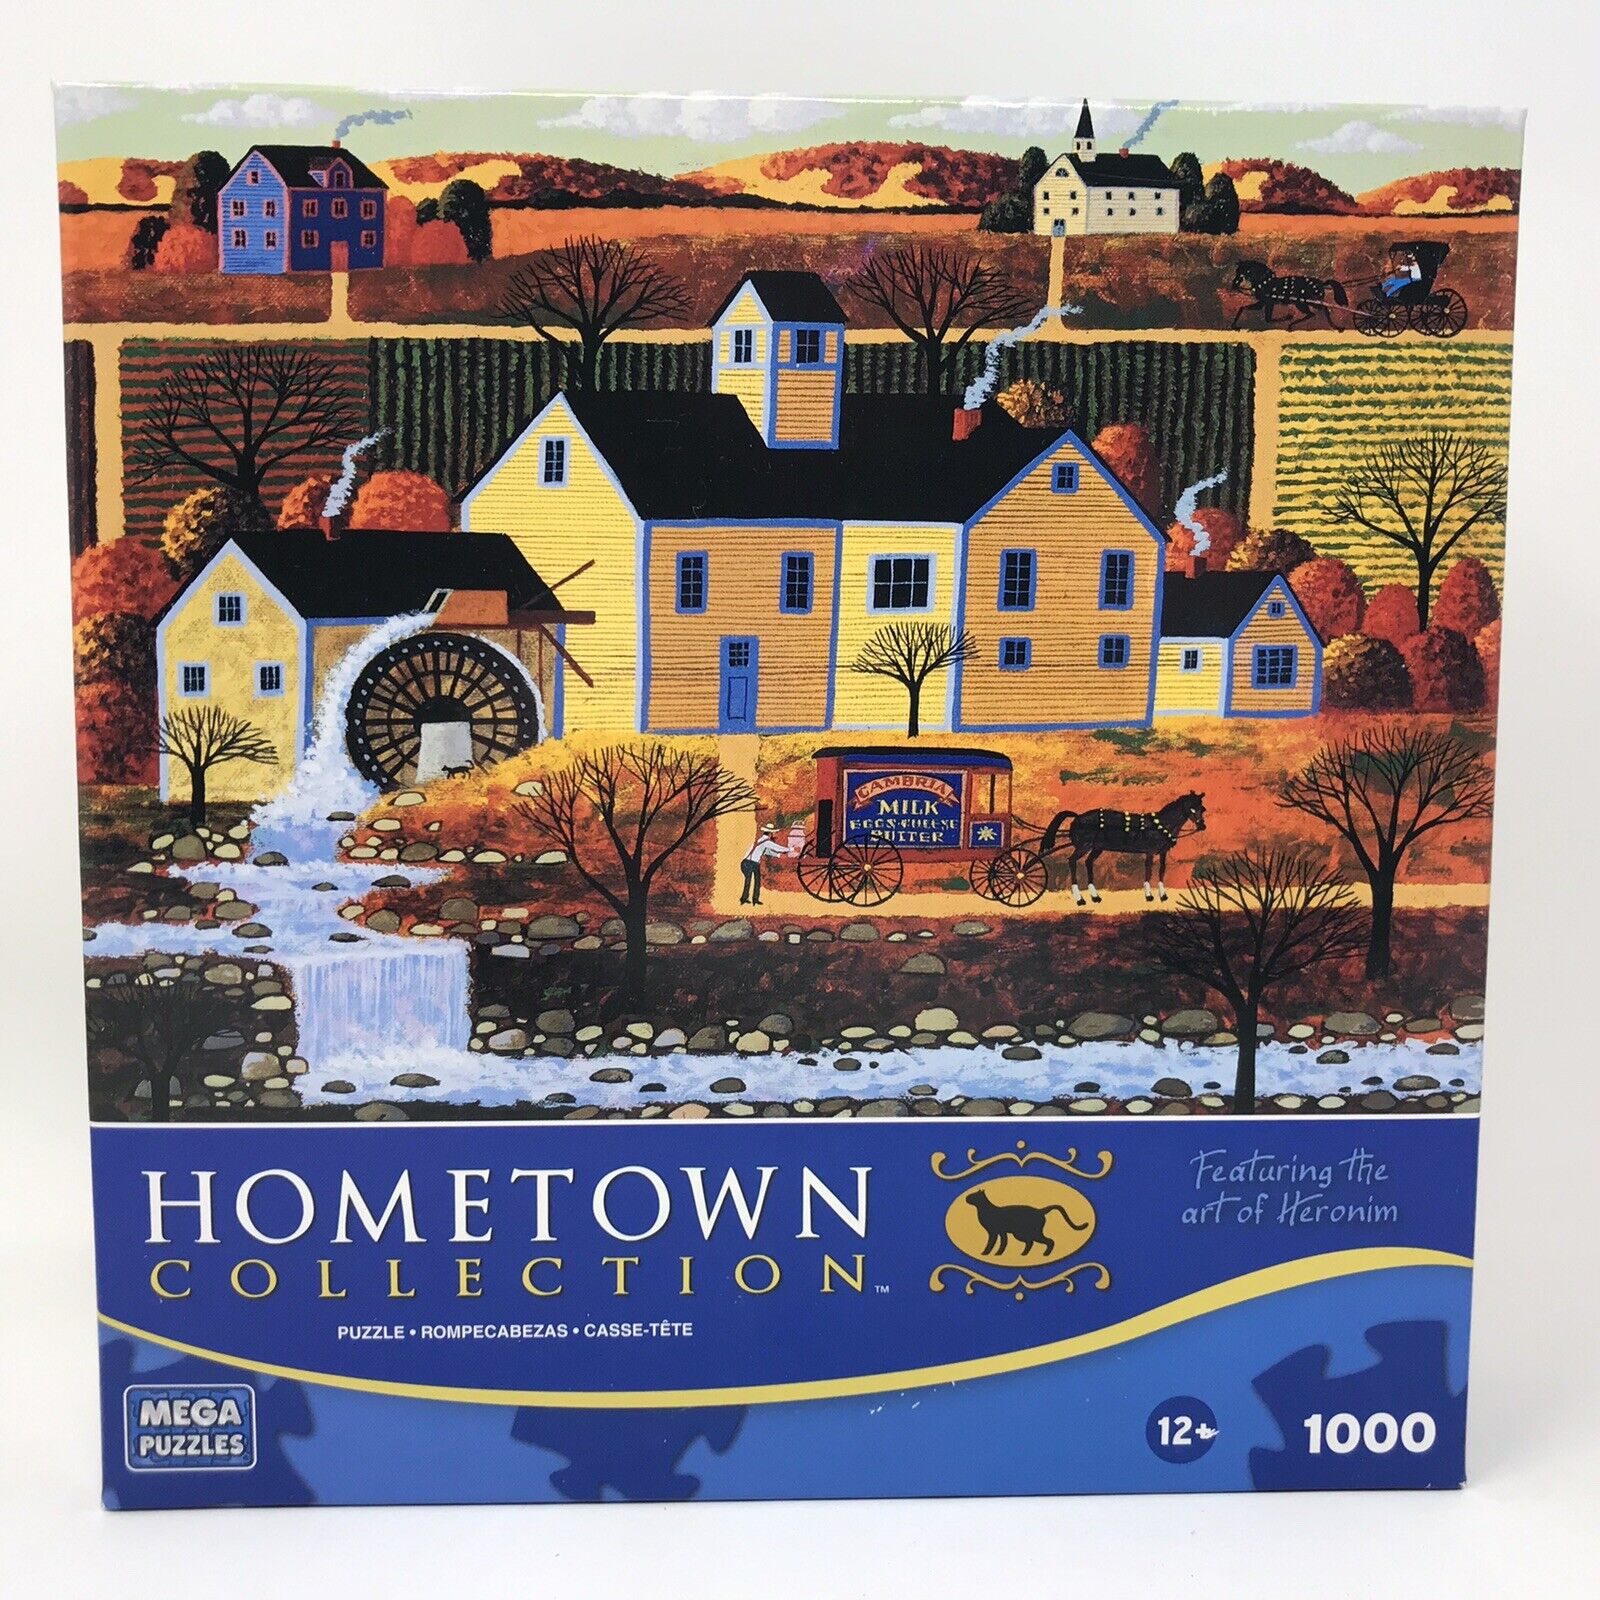 Hometown Collection by Heronim 2010 Delivery at the Mill 1000 Pc Puzzle Complete